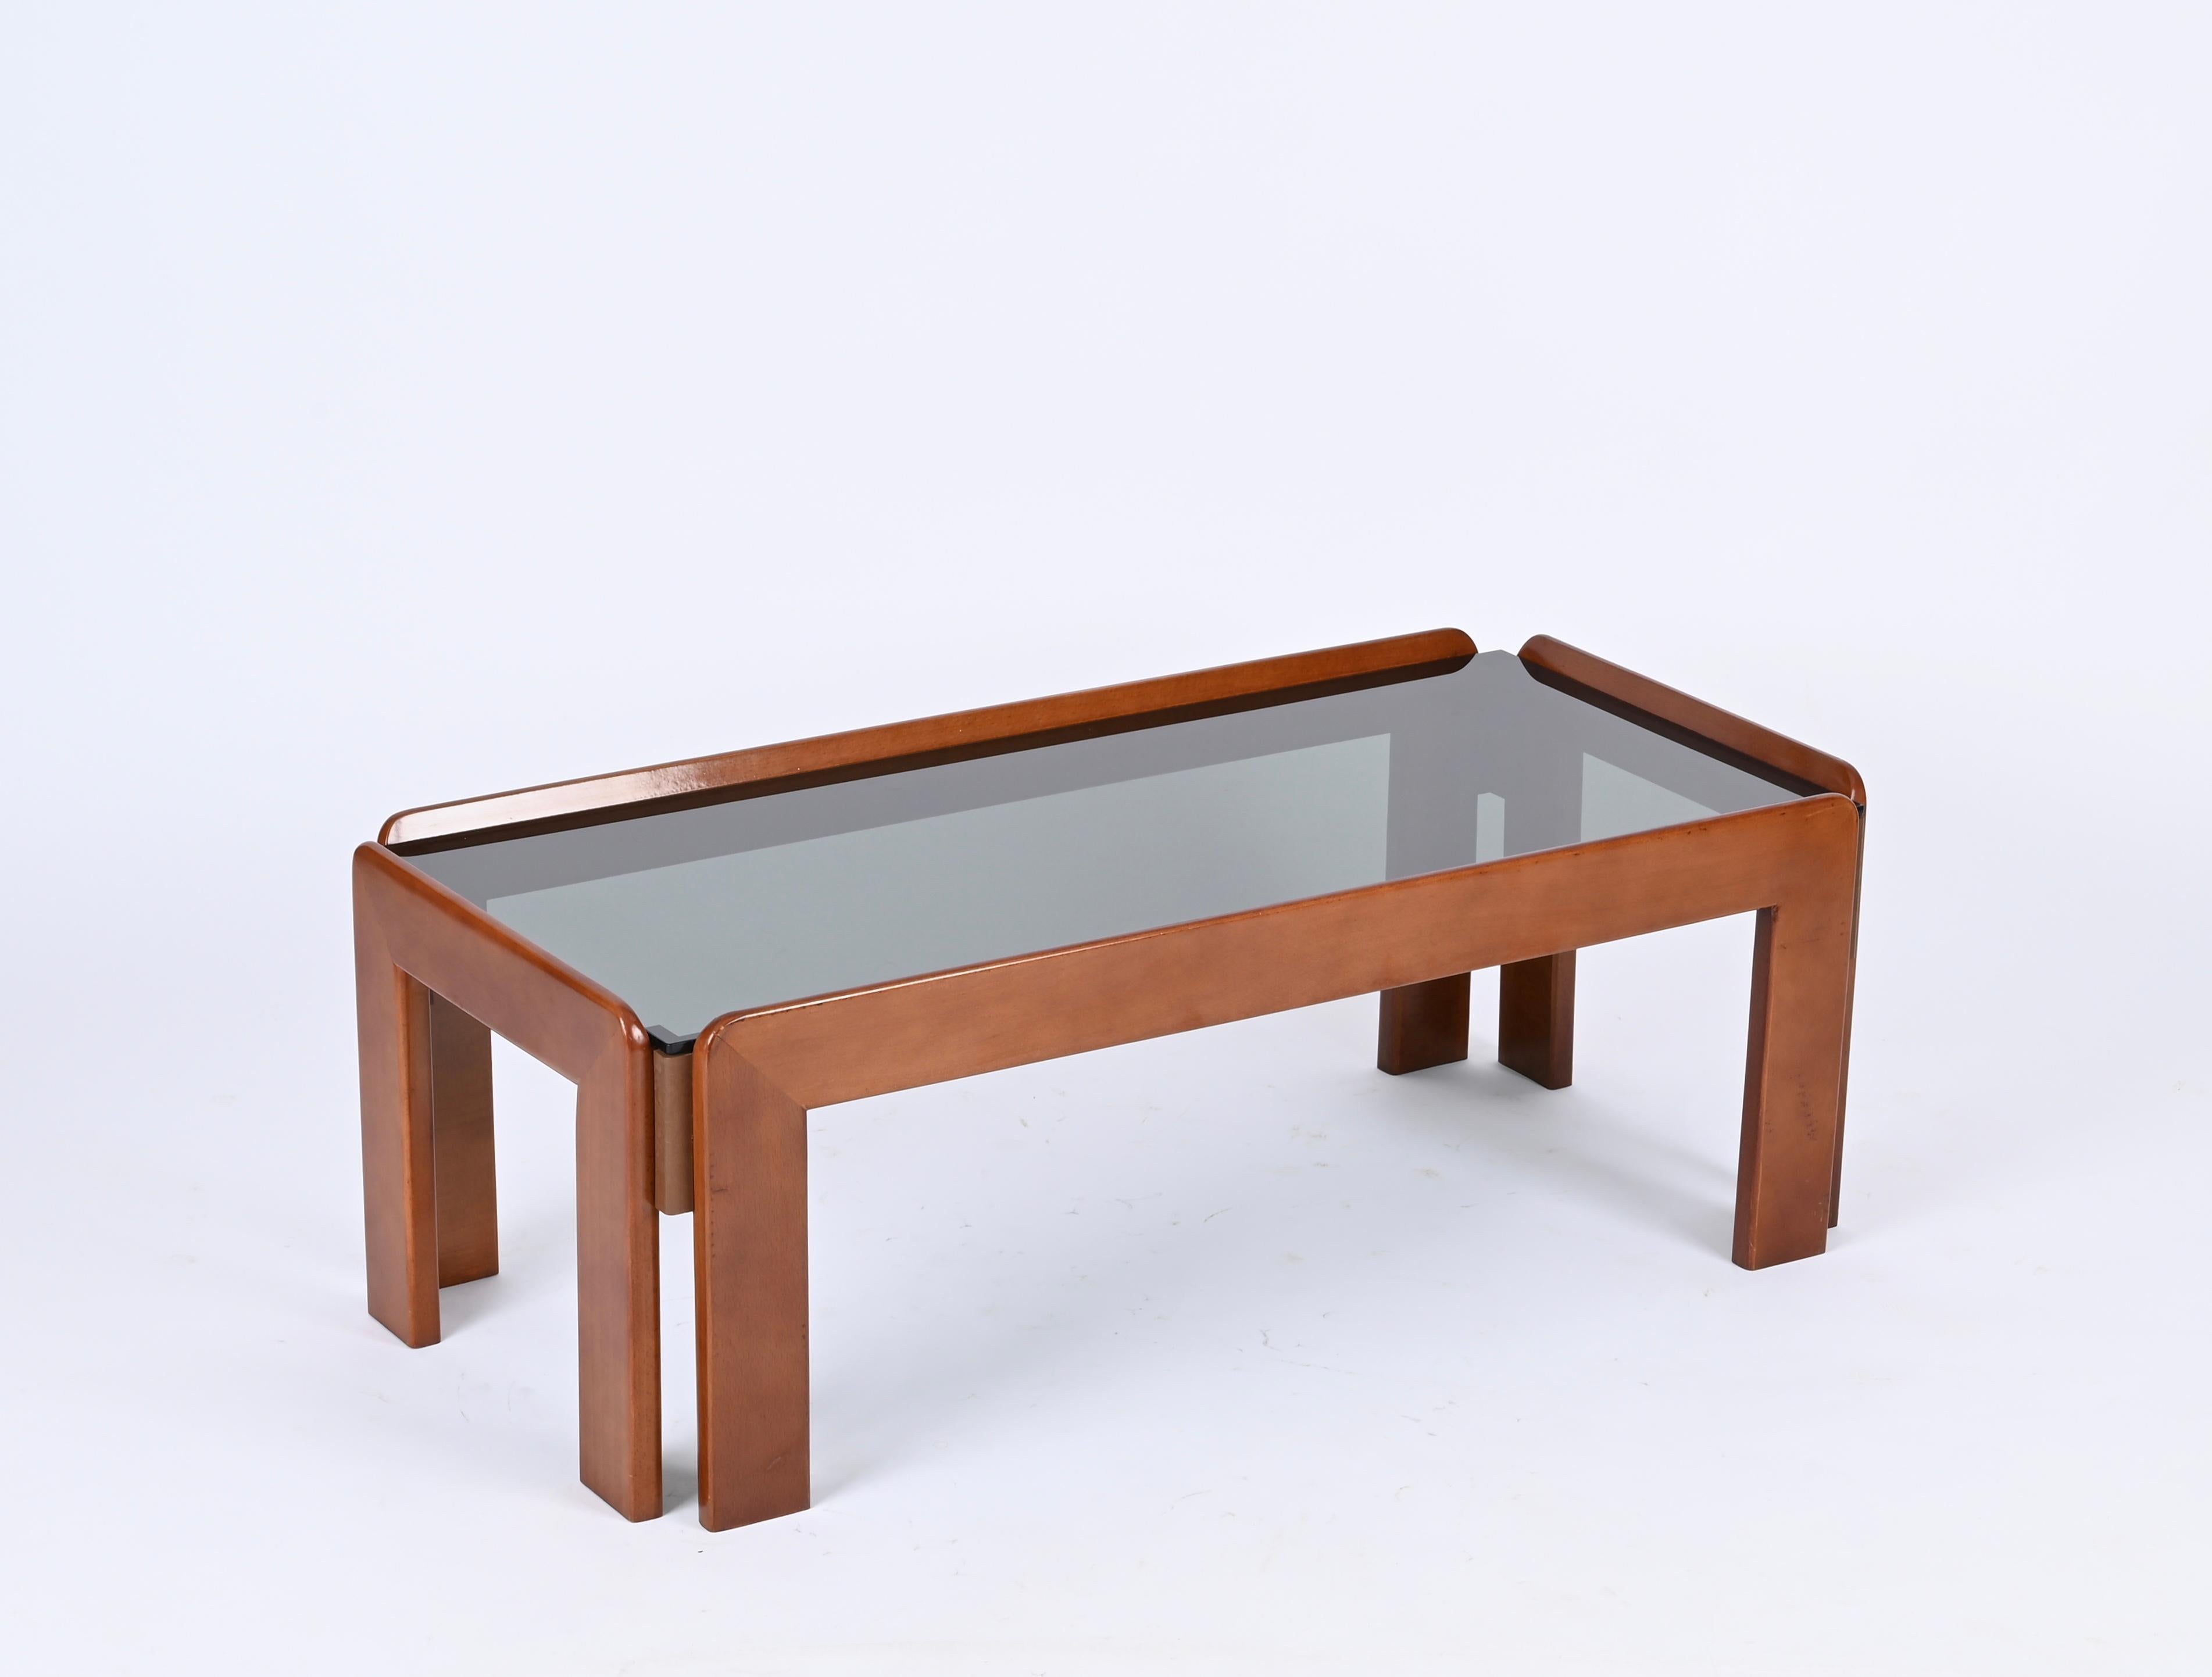 Tobia Scarpa Rectangular Walnut Coffee Table with Smoked Glass, Italy 1960s For Sale 1